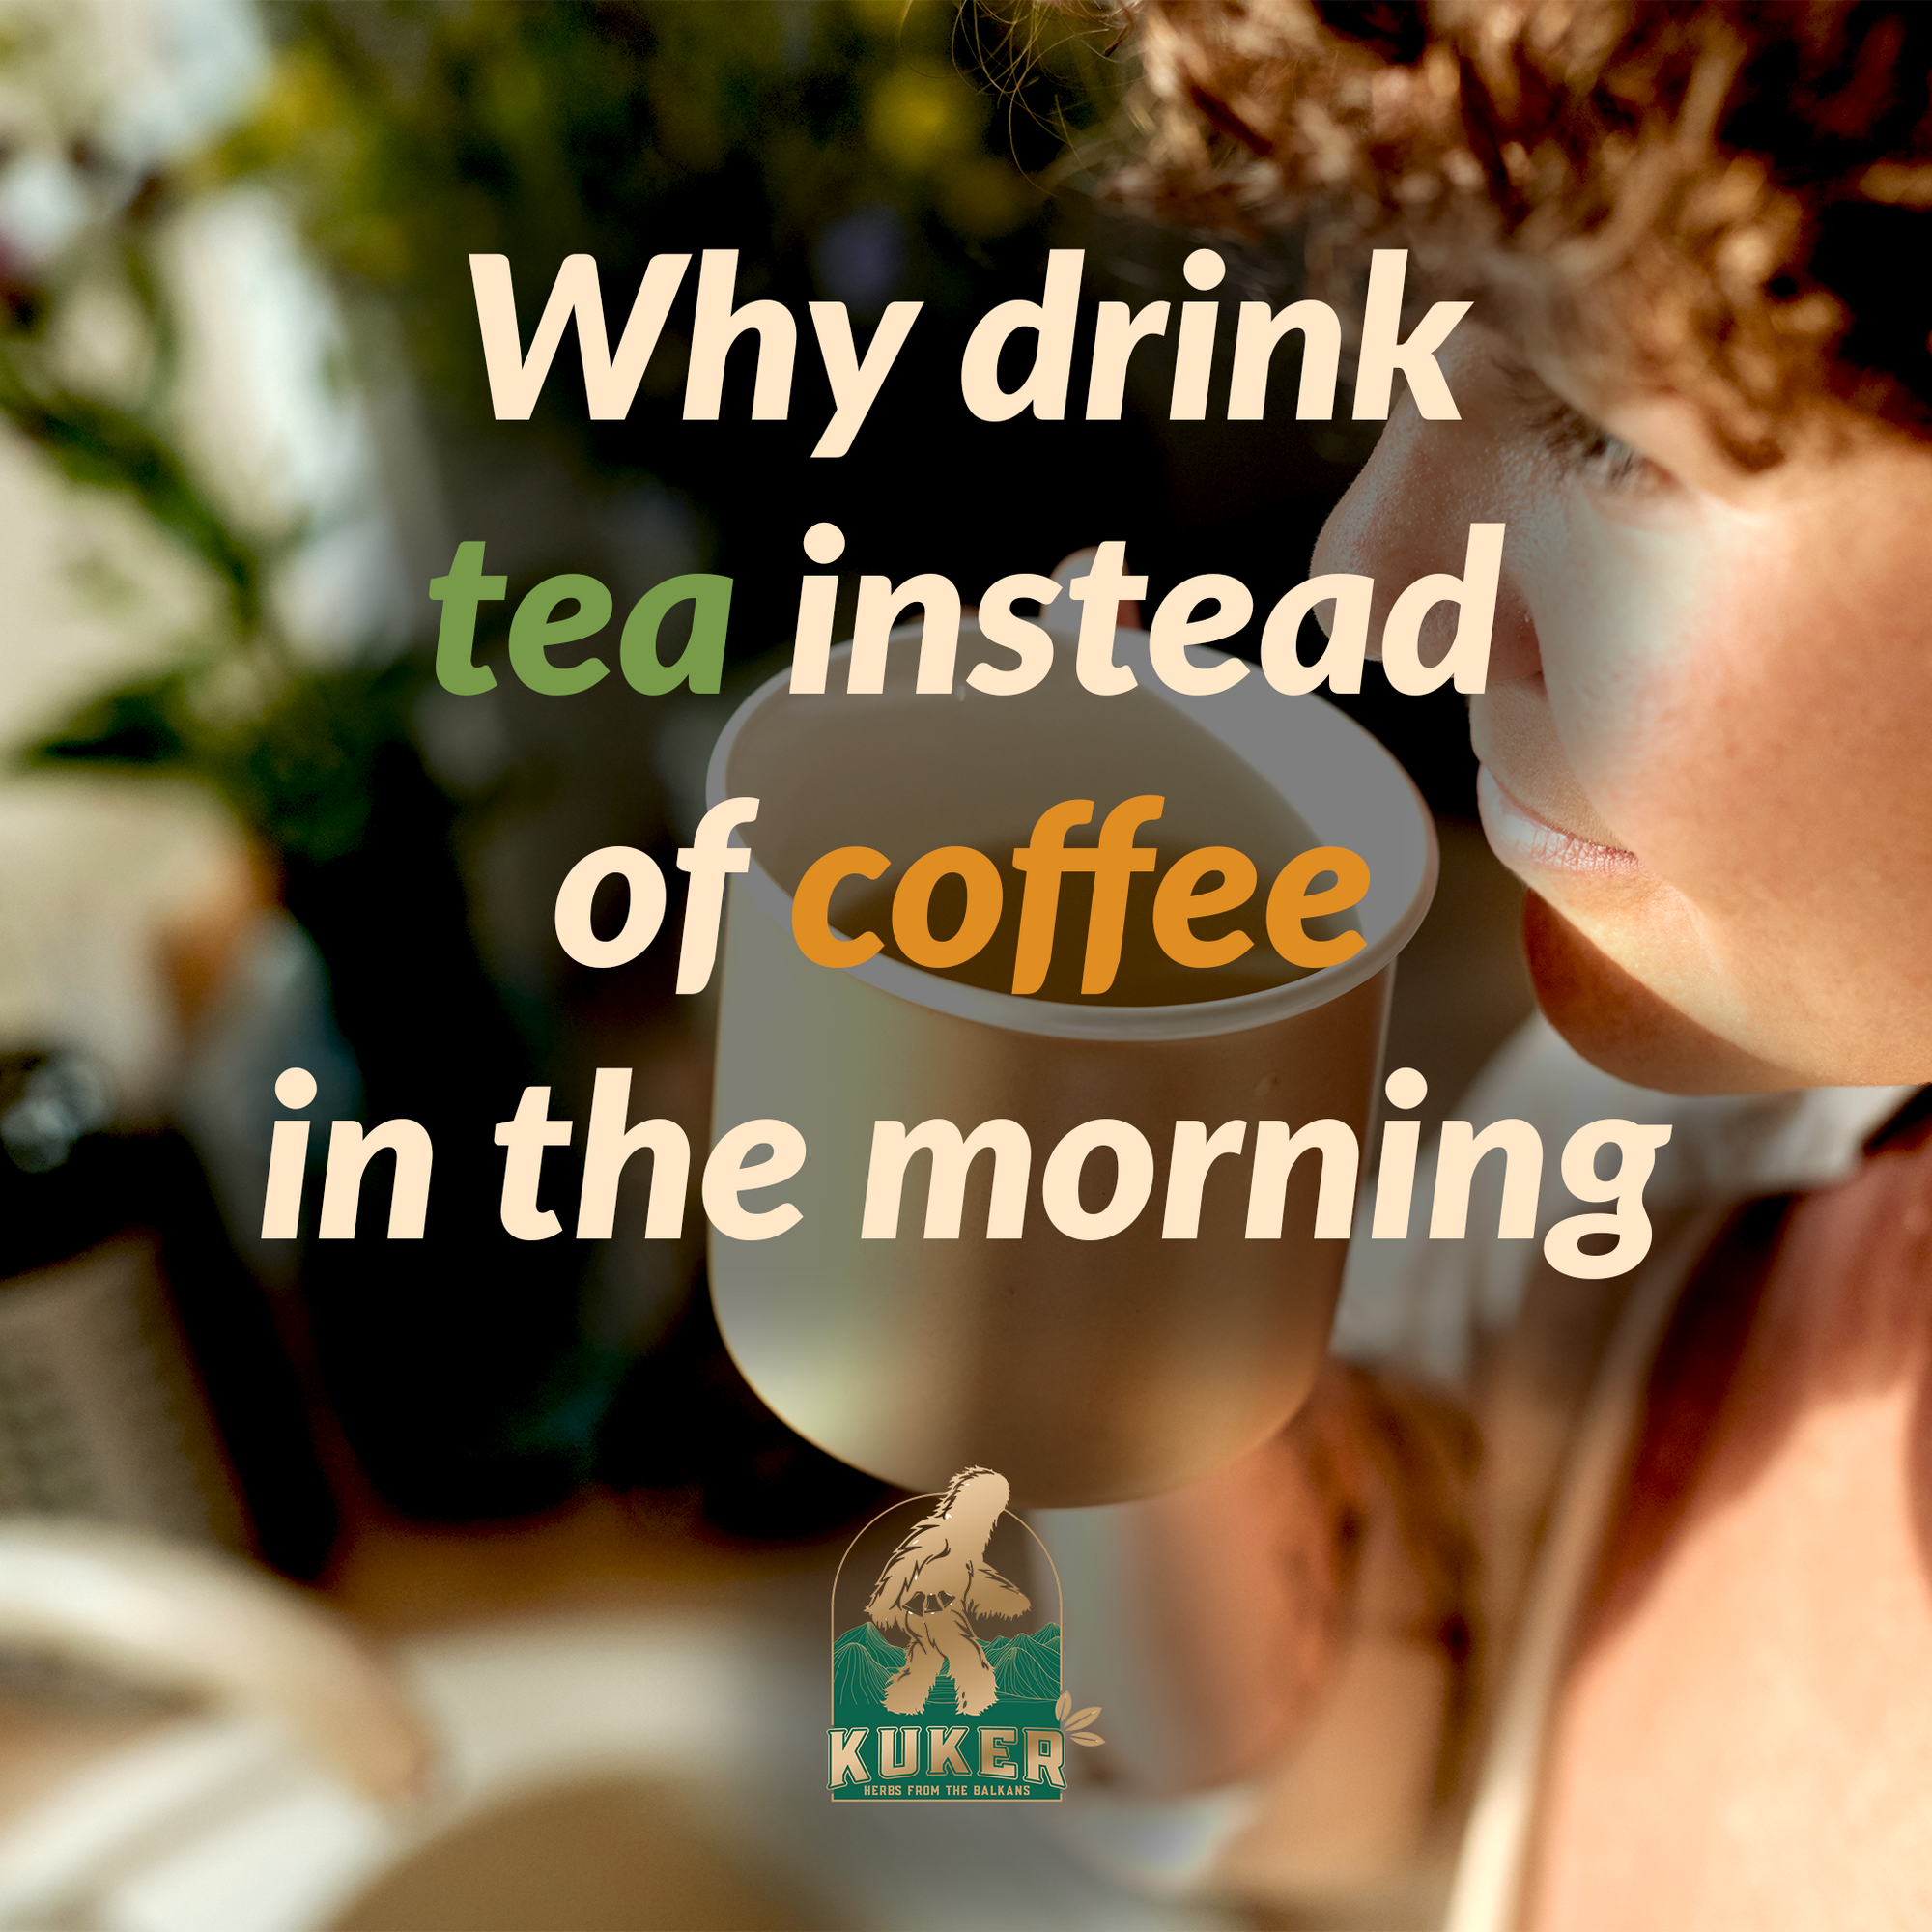 Why drink Tea instead of Coffee in the morning?